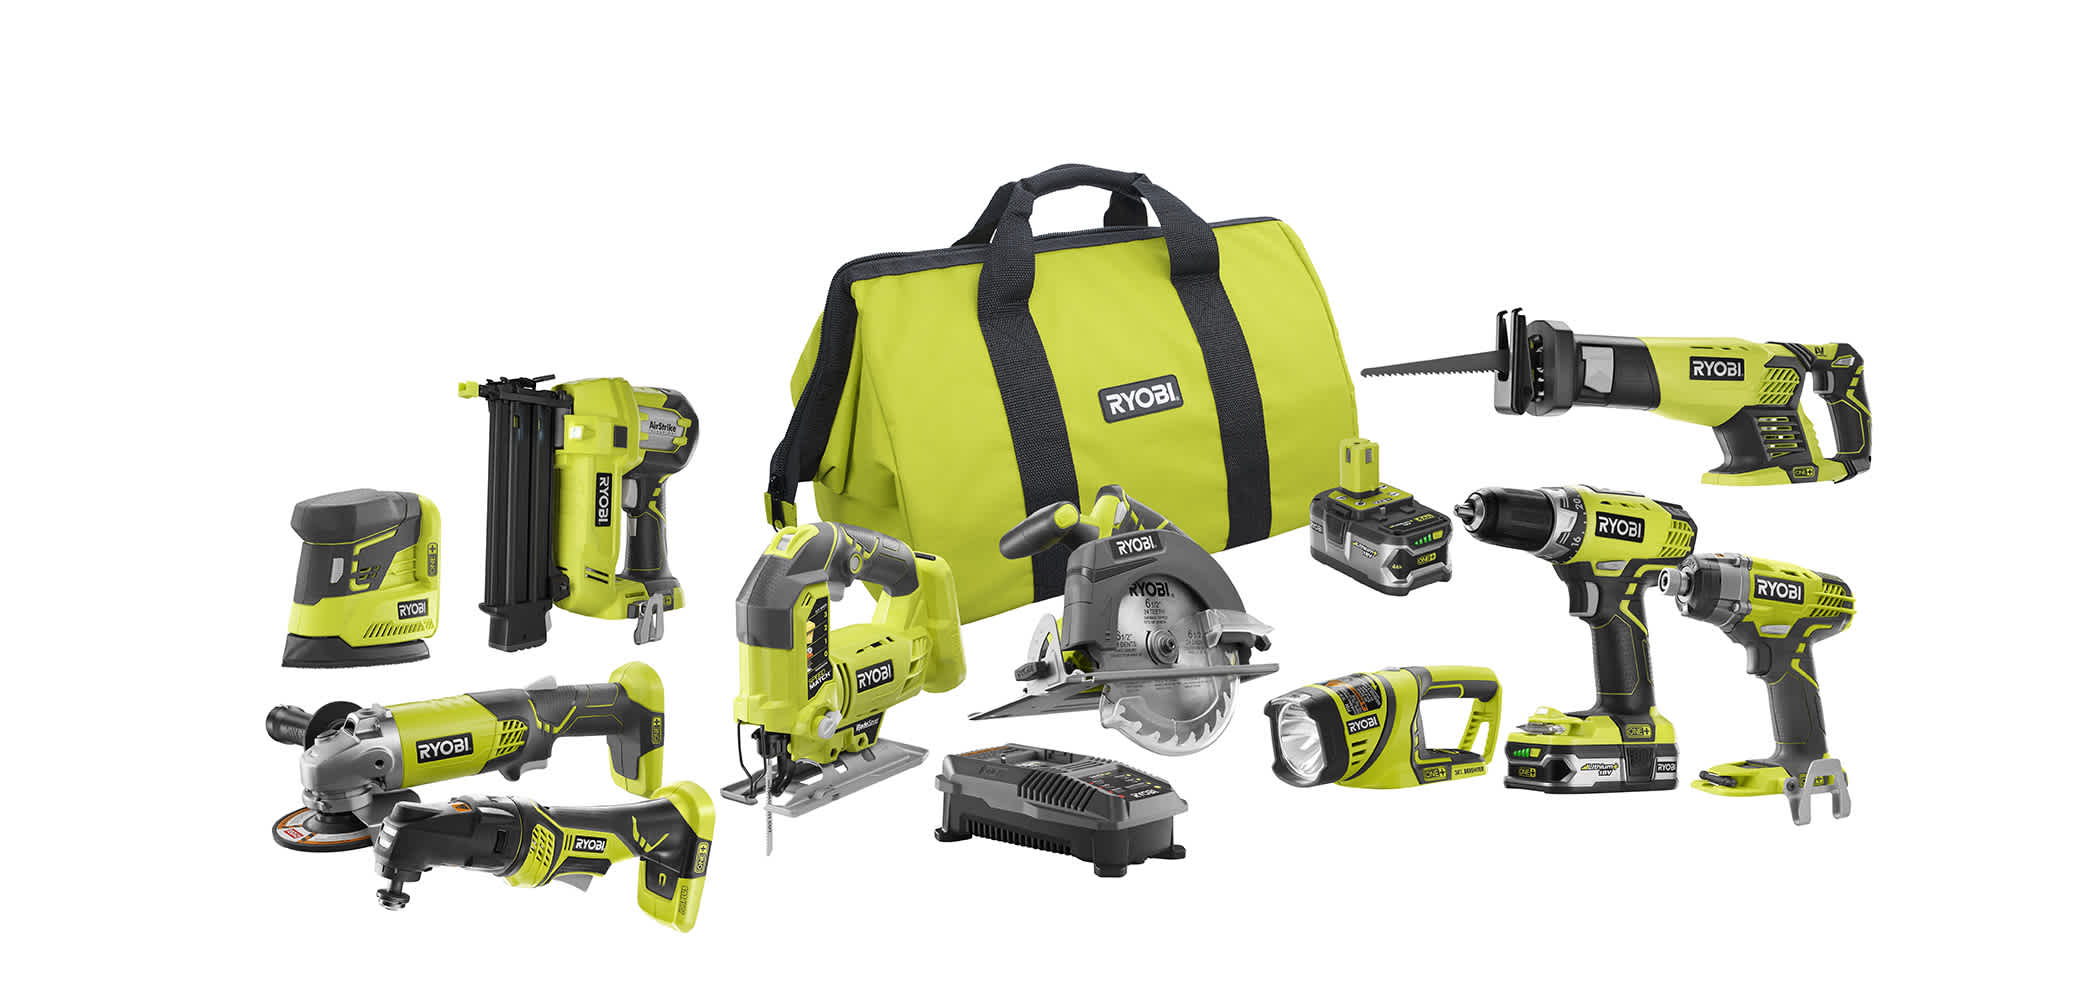 Feature Image for RYOBI 18V ONE+ Lithium-Ion Cordless Combo Kit (10-Tool) with (1) 4.0 Ah Battery & (1) 1.5 Ah Battery.